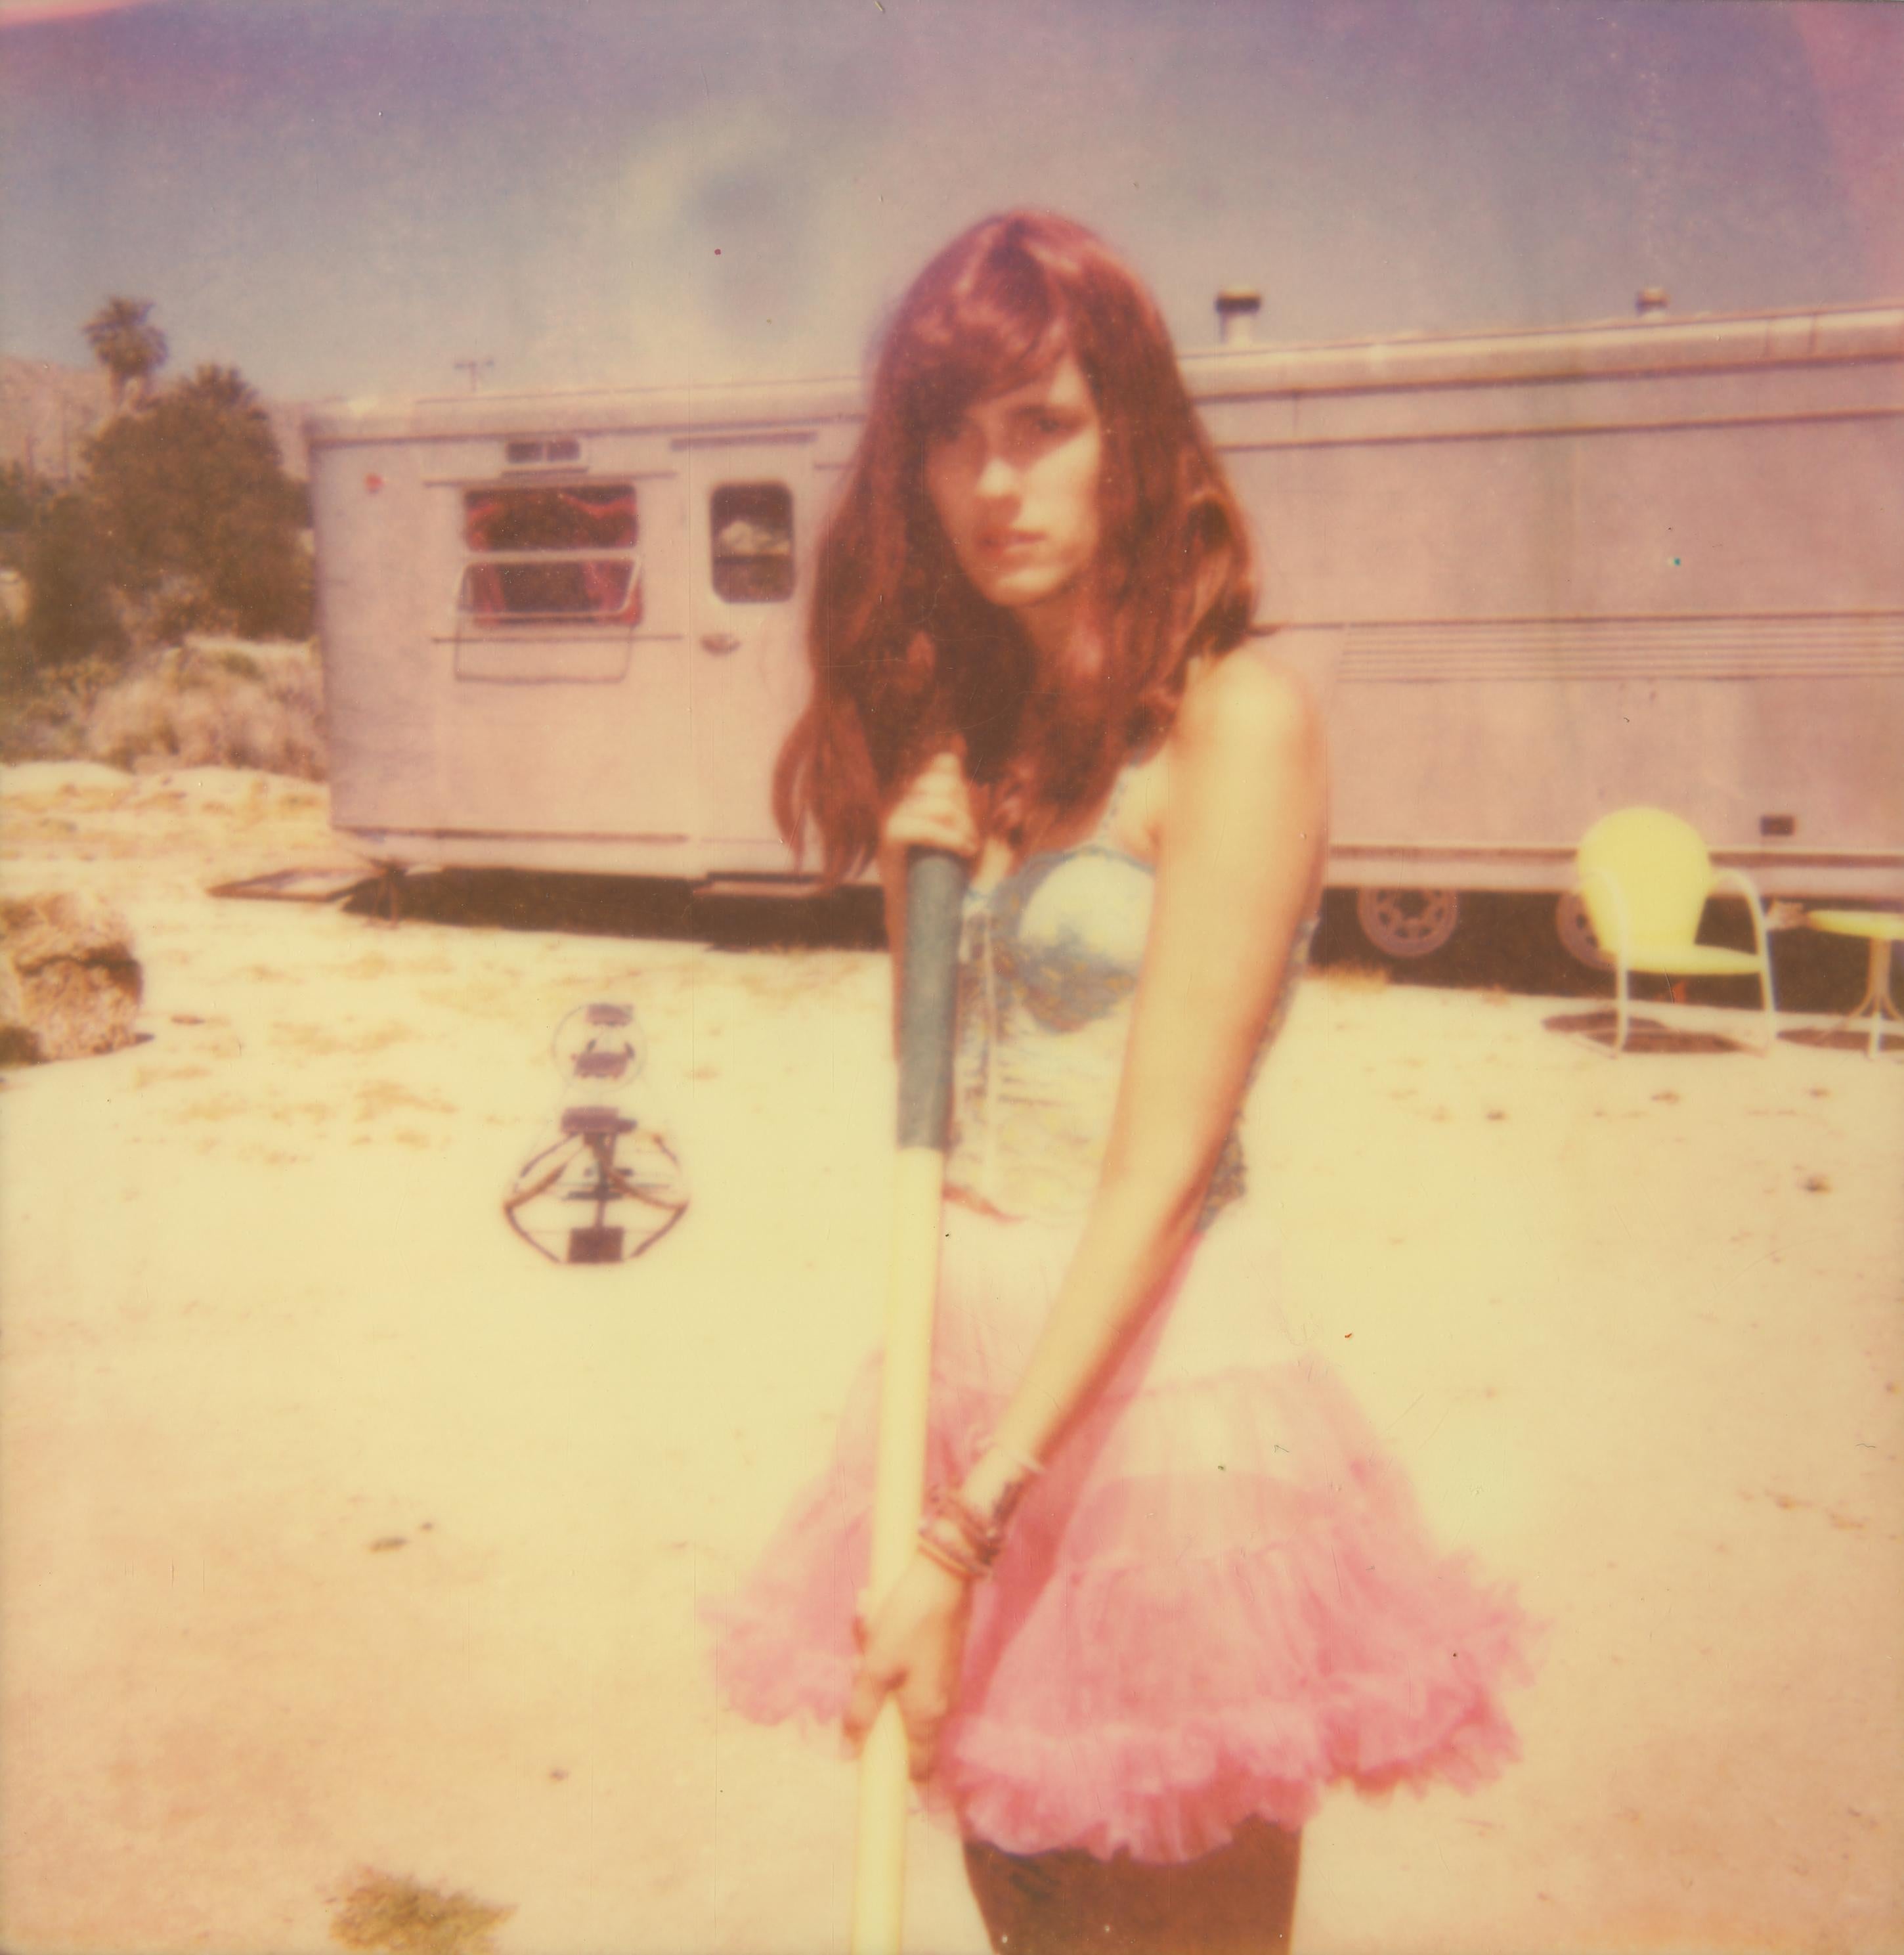 A lonely and deserted Place - The Girl behind the White Picket Fence, Polaroid